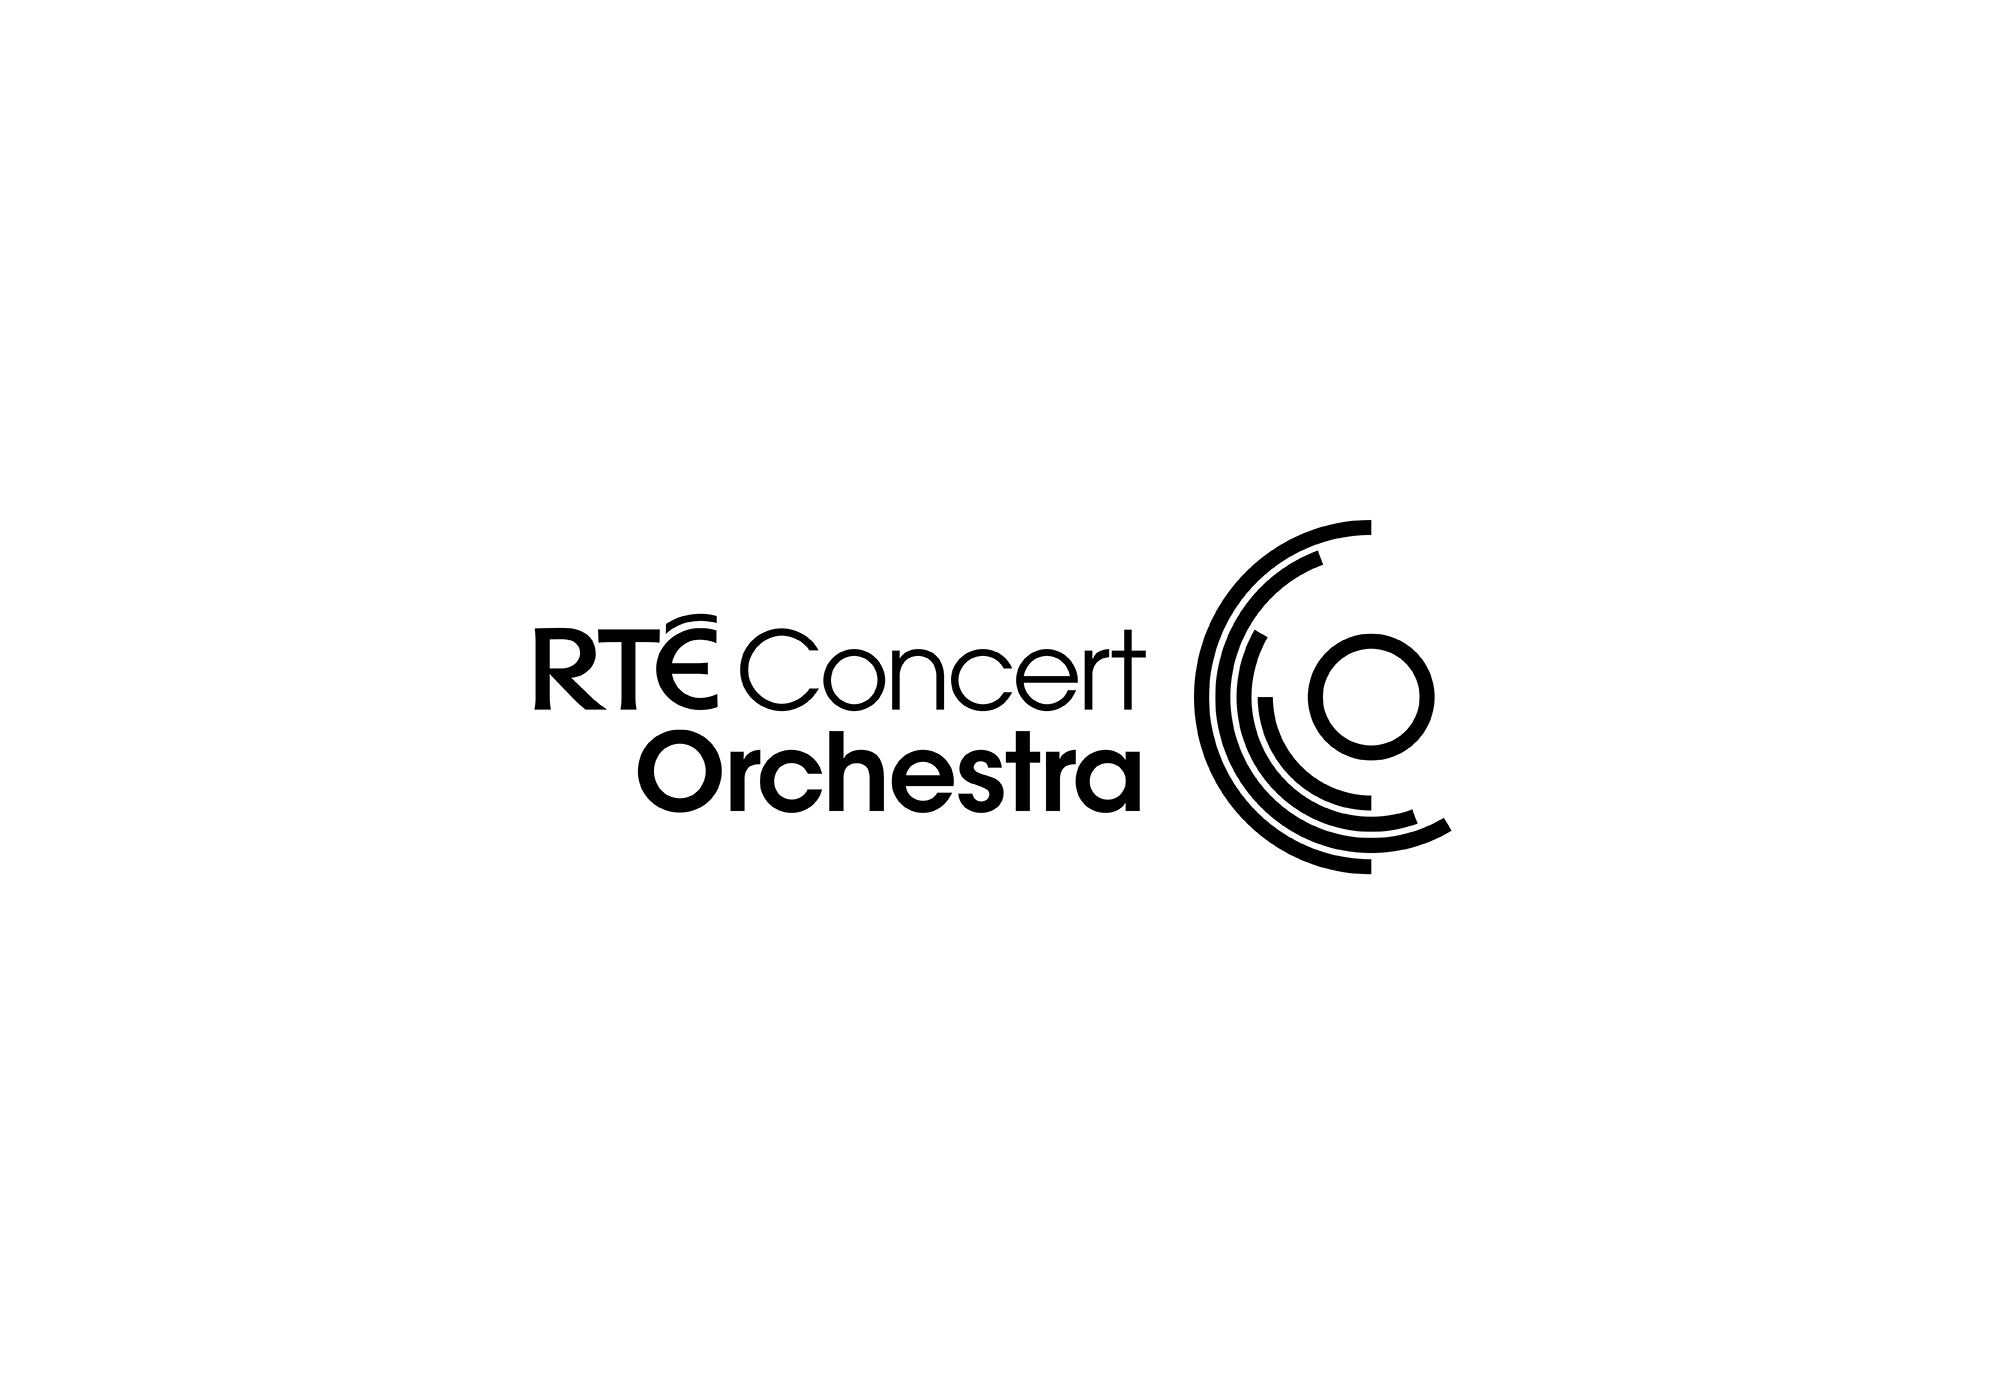 Cover image: RTÉ Concert Orchestra Identity framework